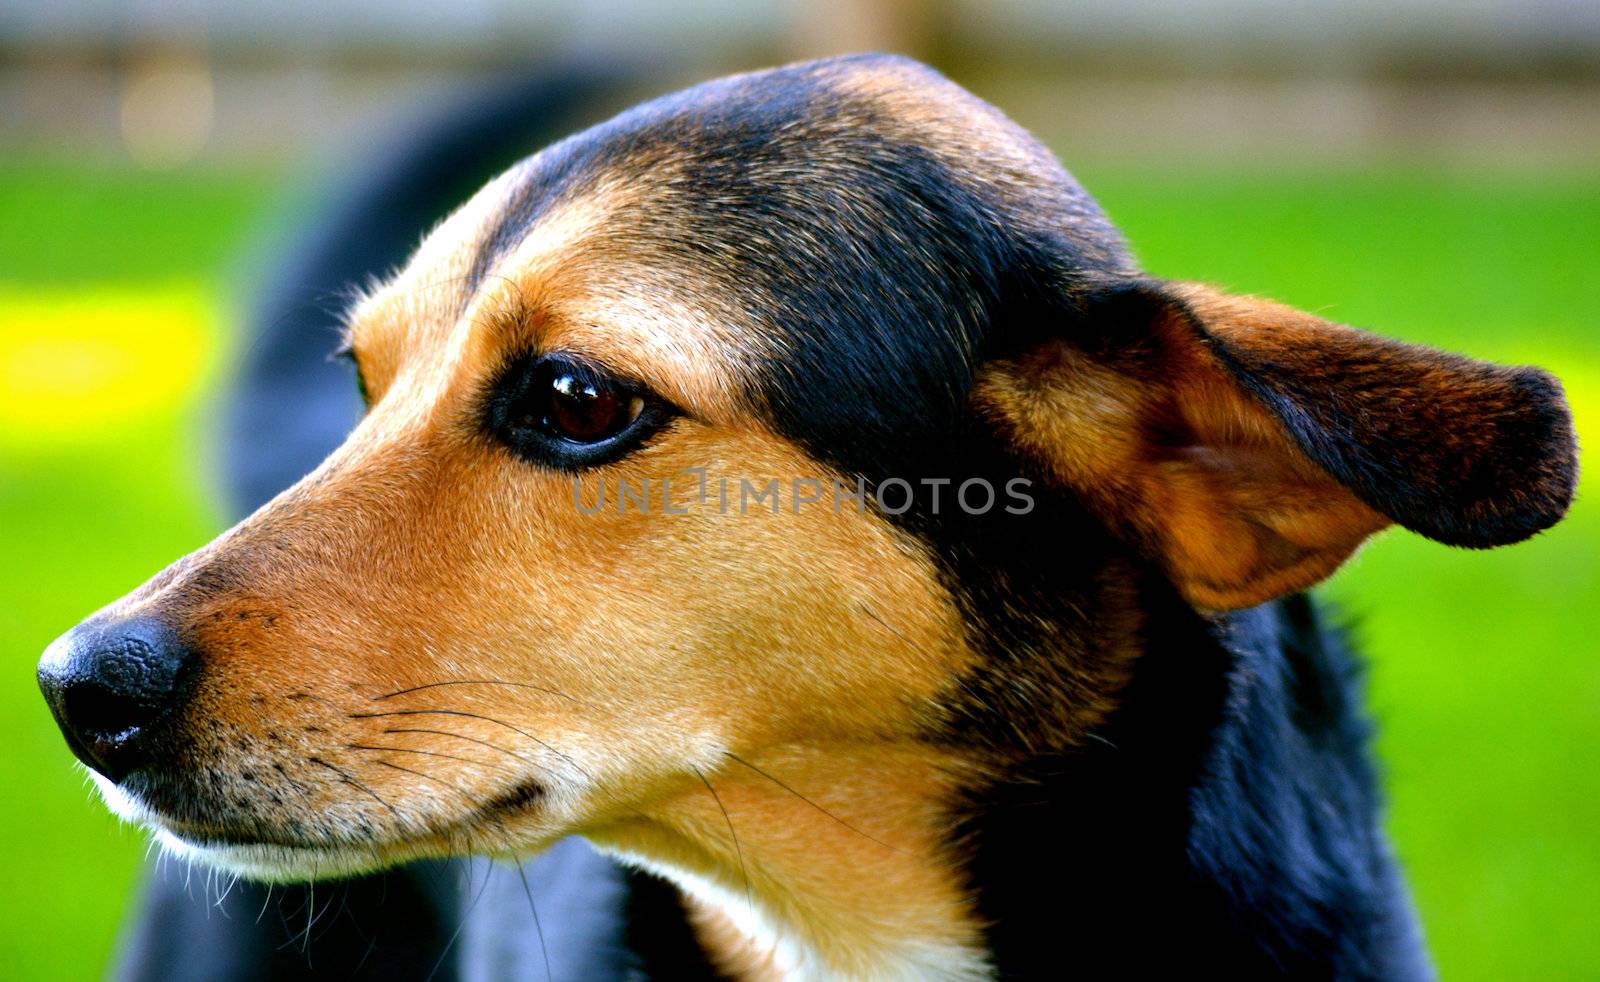 Meagle - Min-Pin Beagle Mixed Breed Dog by RefocusPhoto